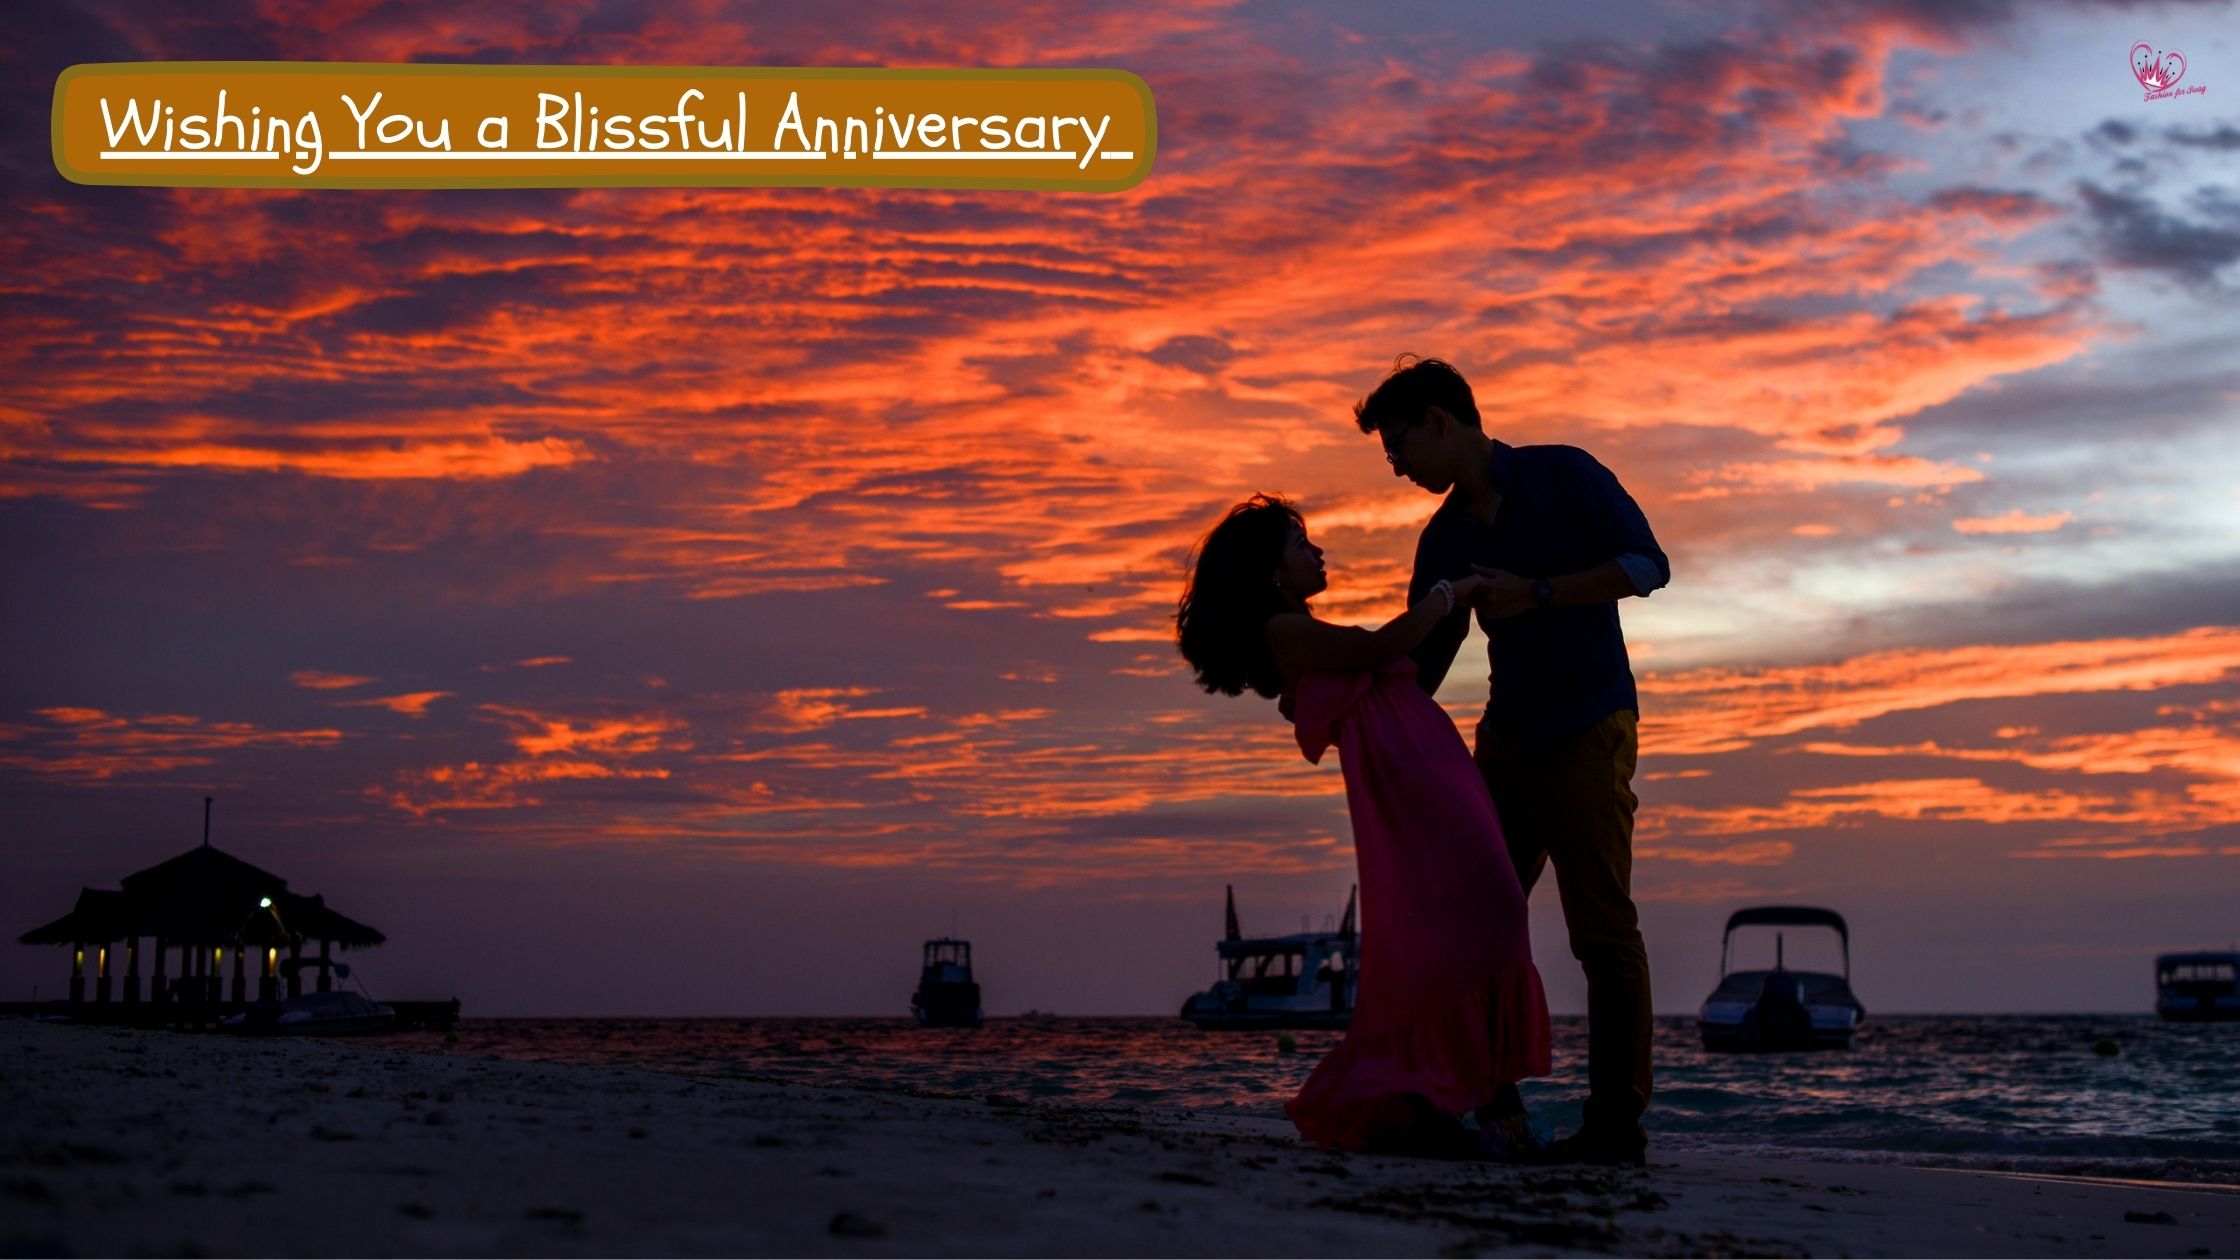 Wishing You a Blissful Anniversary Filled with Joy and Happiness